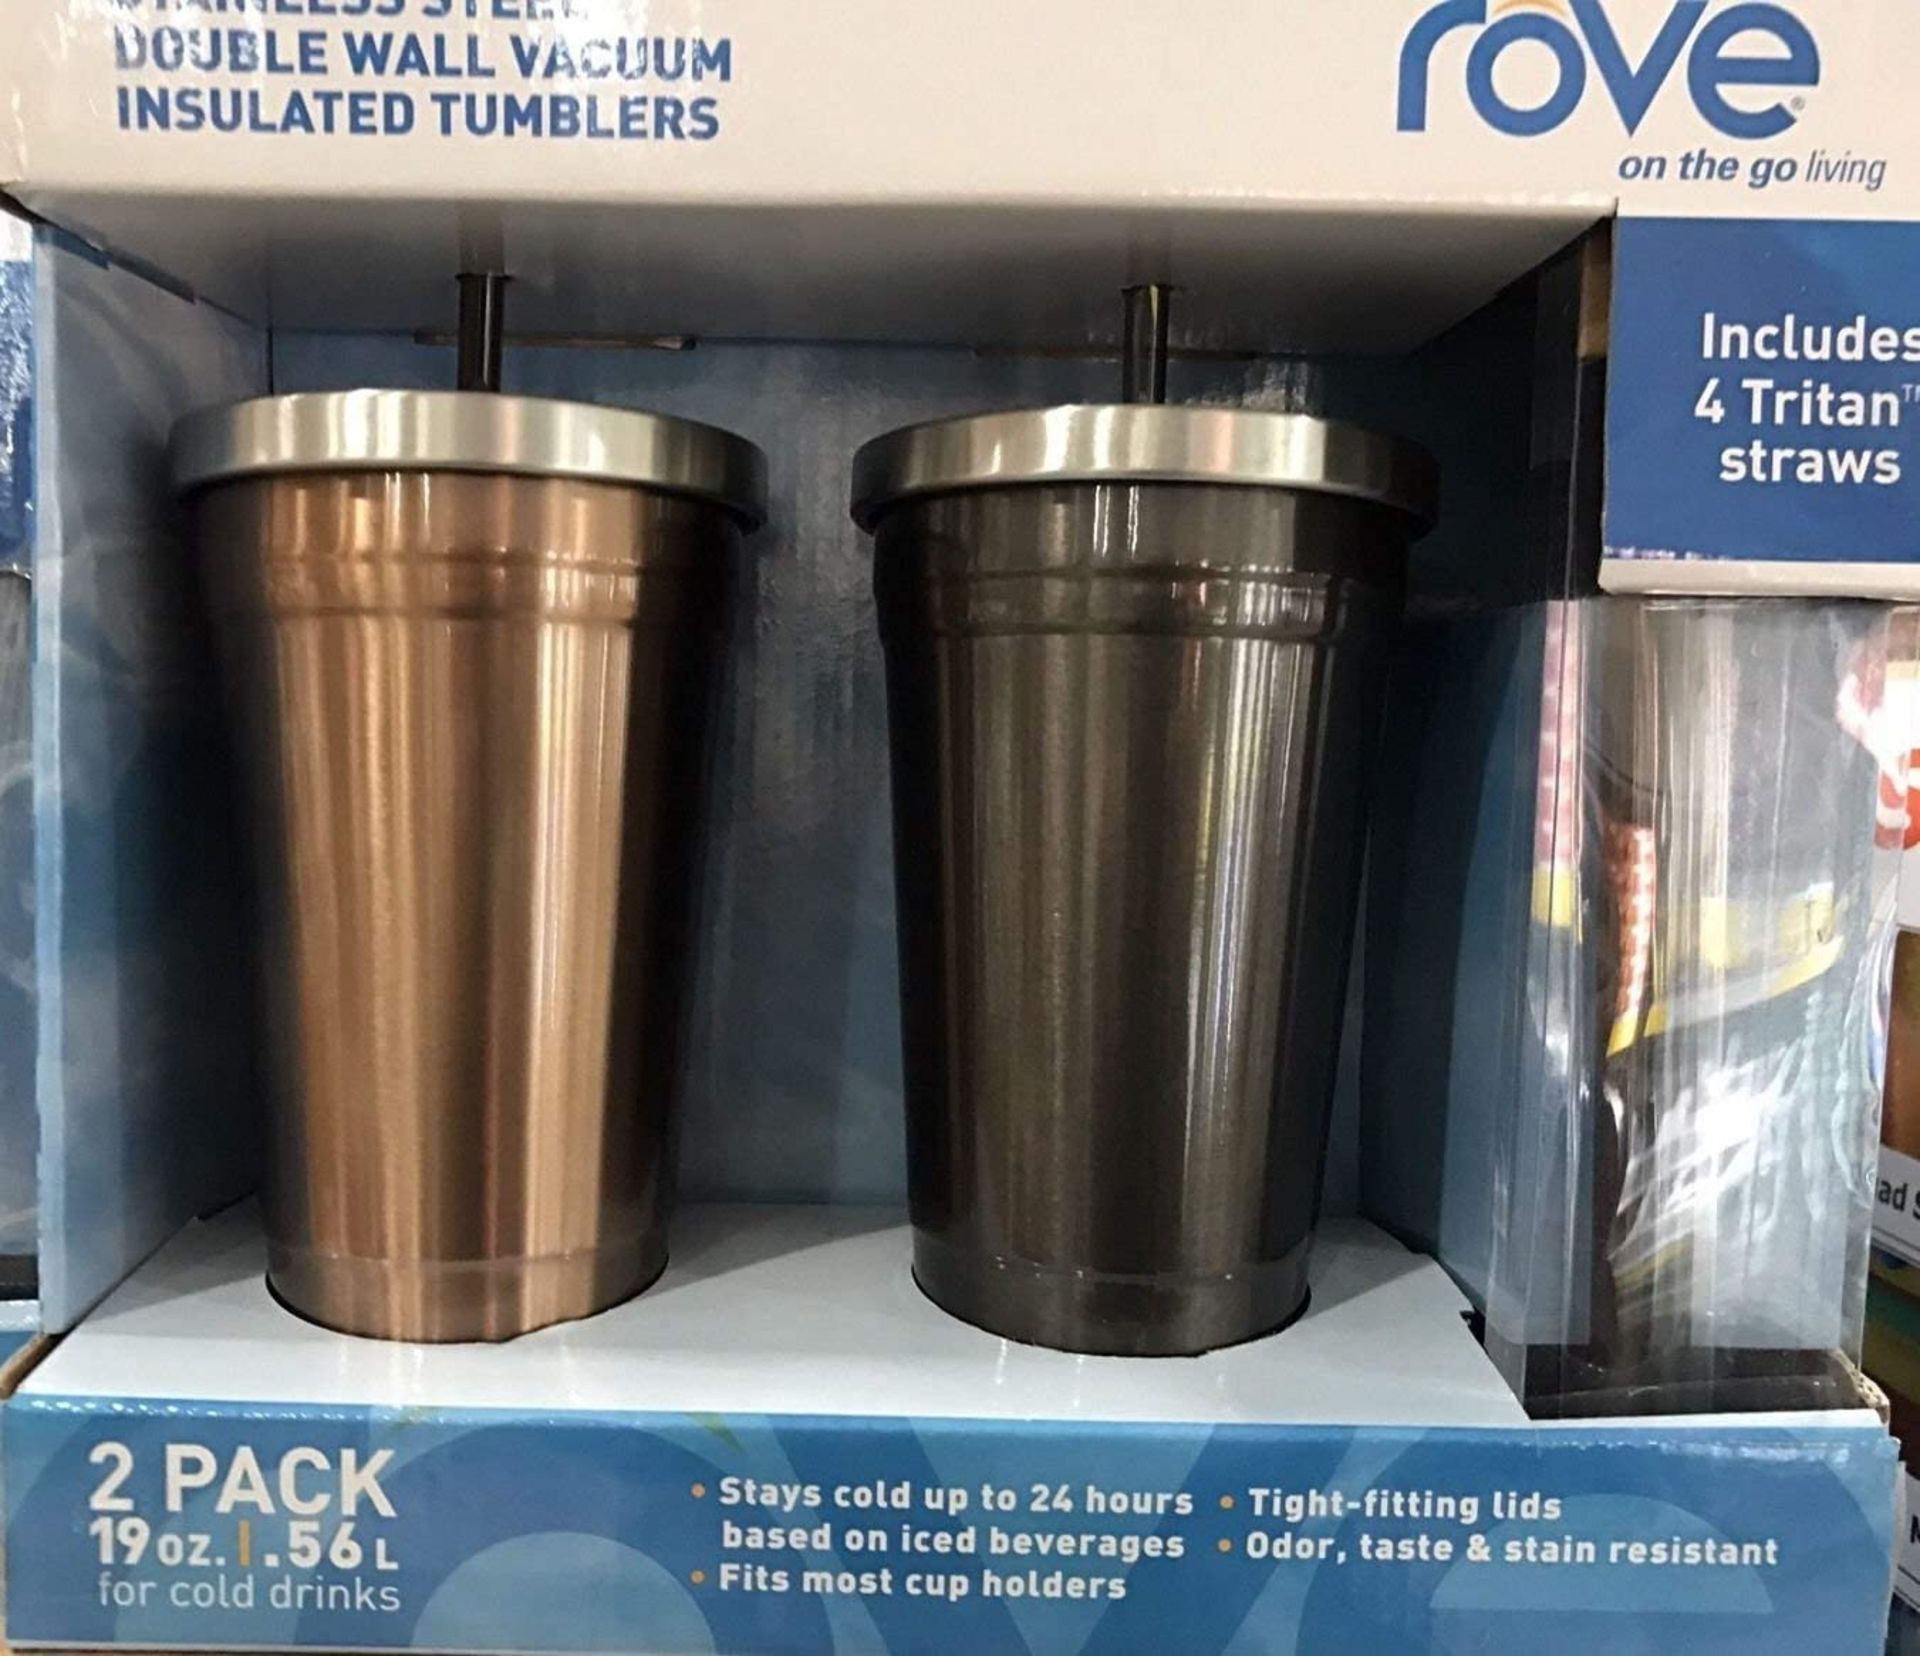 1 BRAND NEW BOX OF 2 ROVE STAINLESS STEEL DOUBLE WALL VACUUM INSULATED TUMBLERS WITH STRAWS RRP Â£